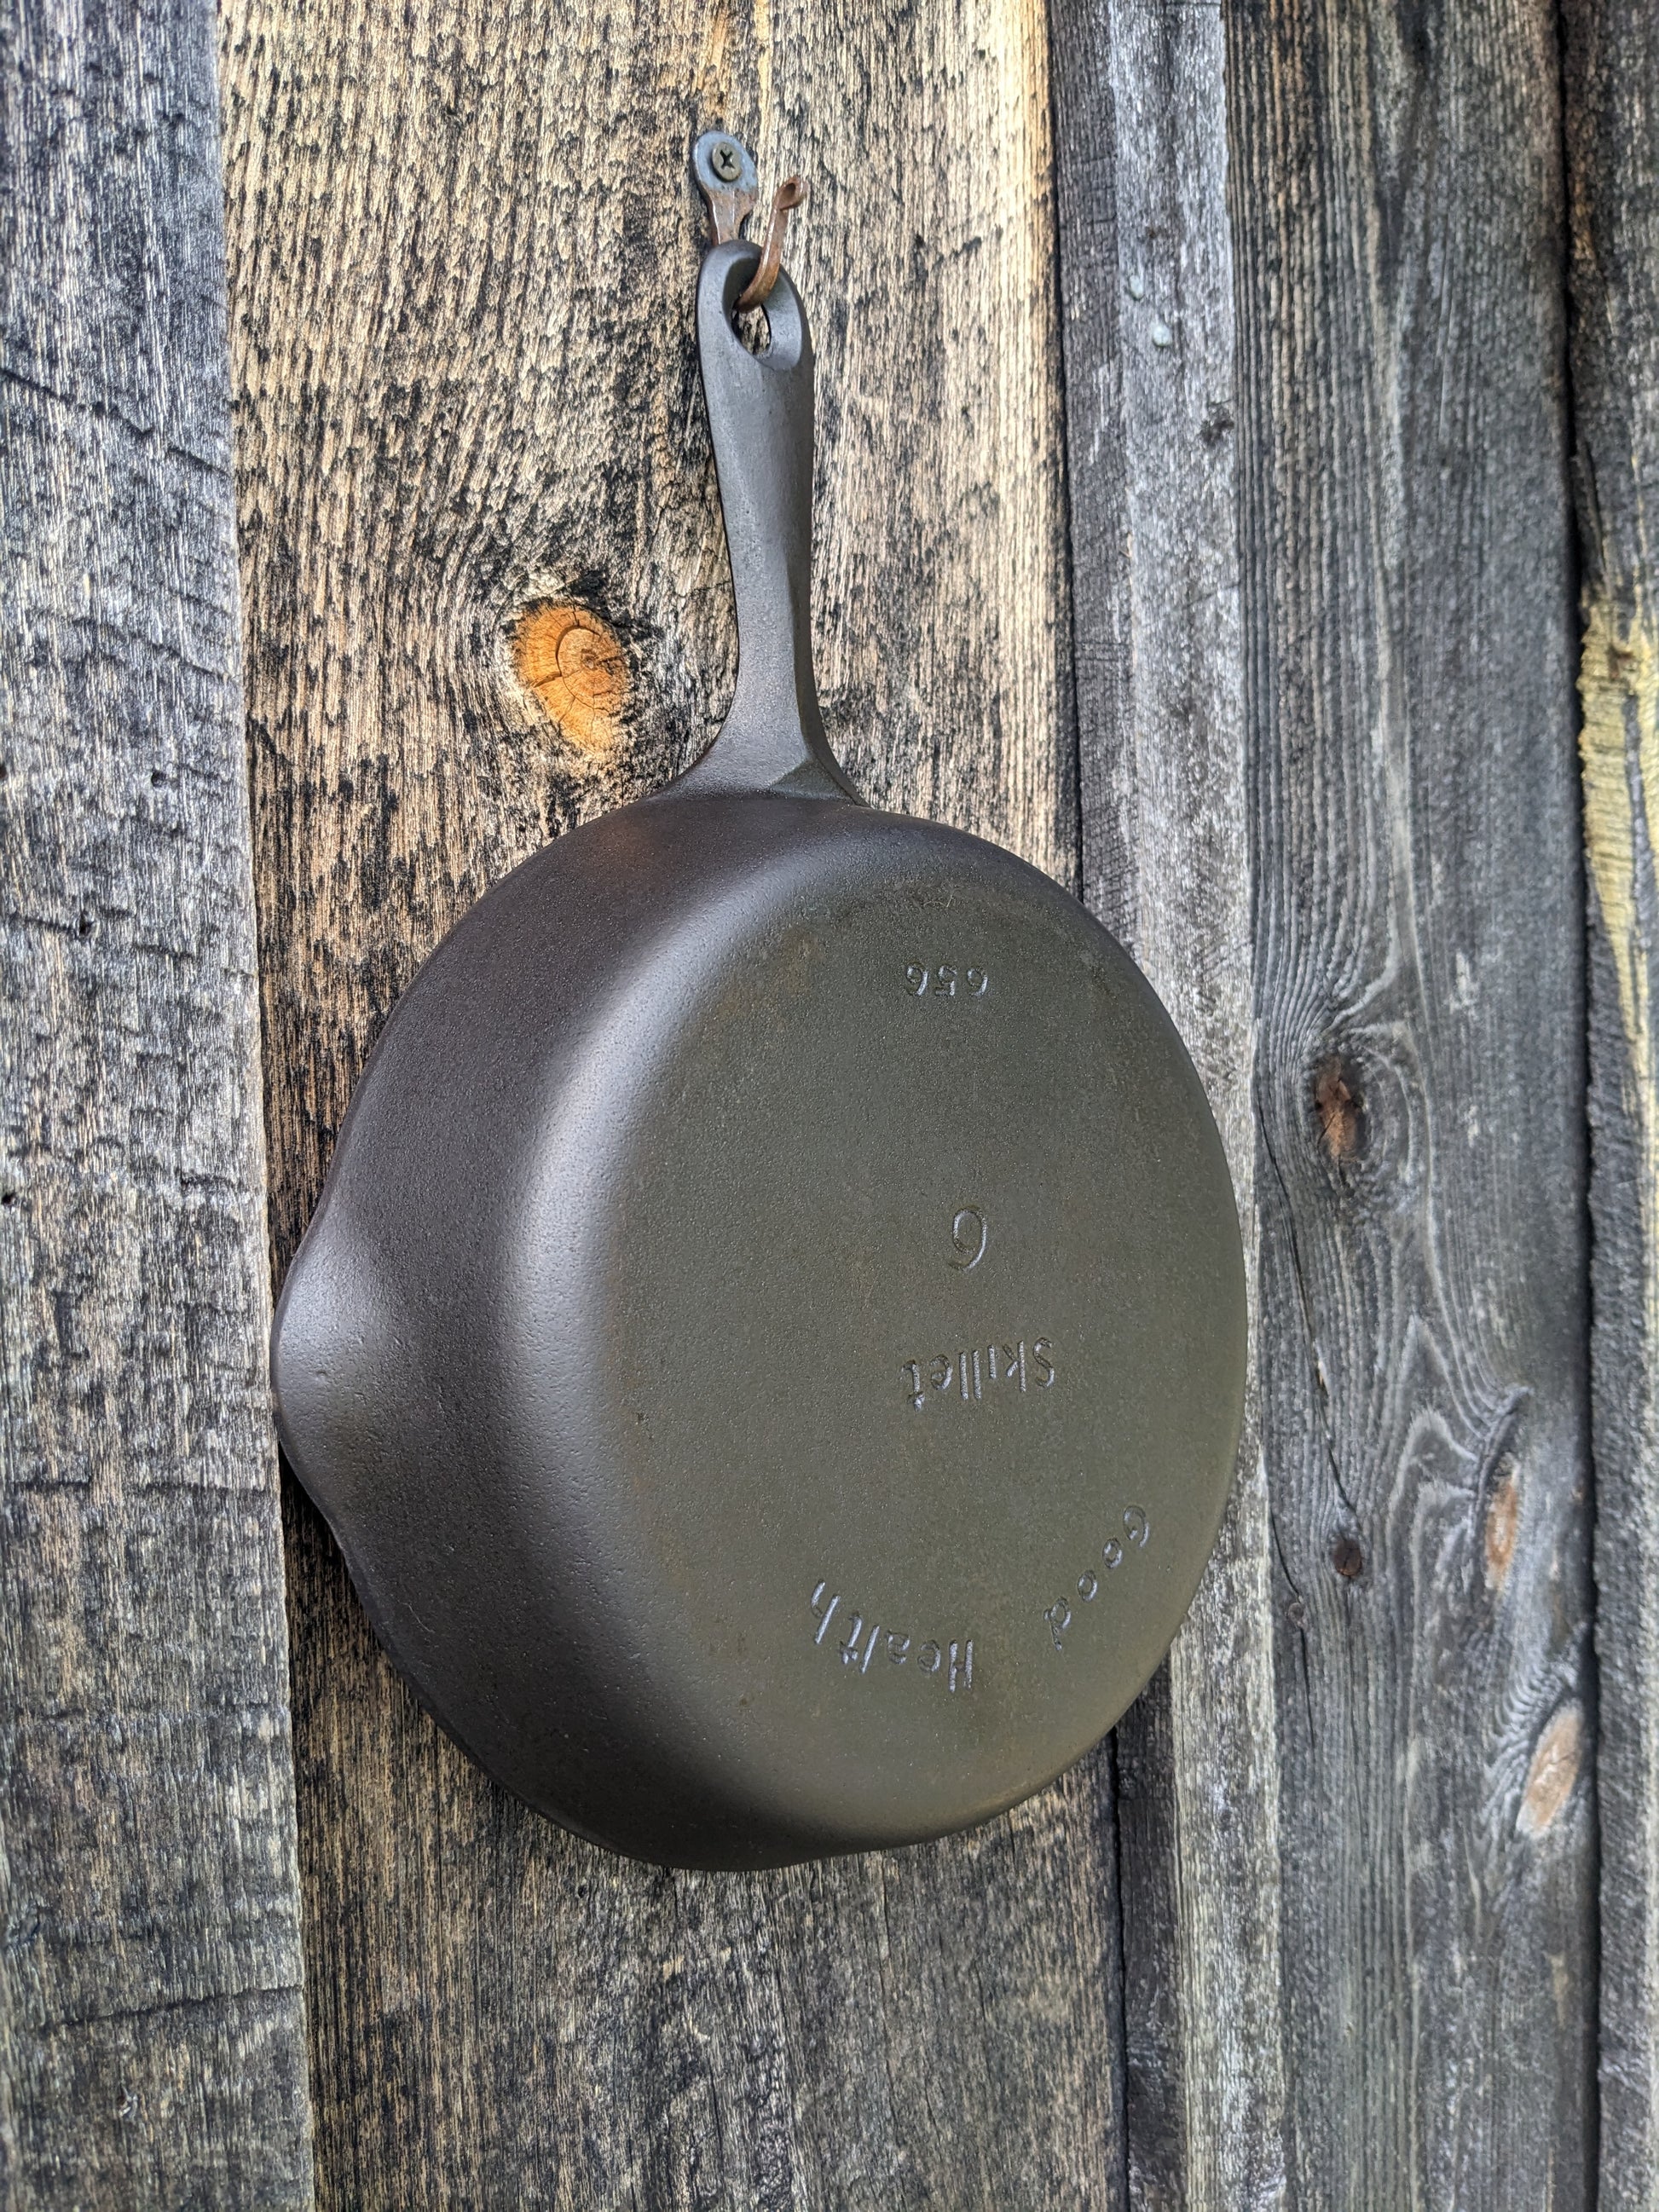 1930's Griswold #8 Cast Iron Skillet with Large Block Logo and